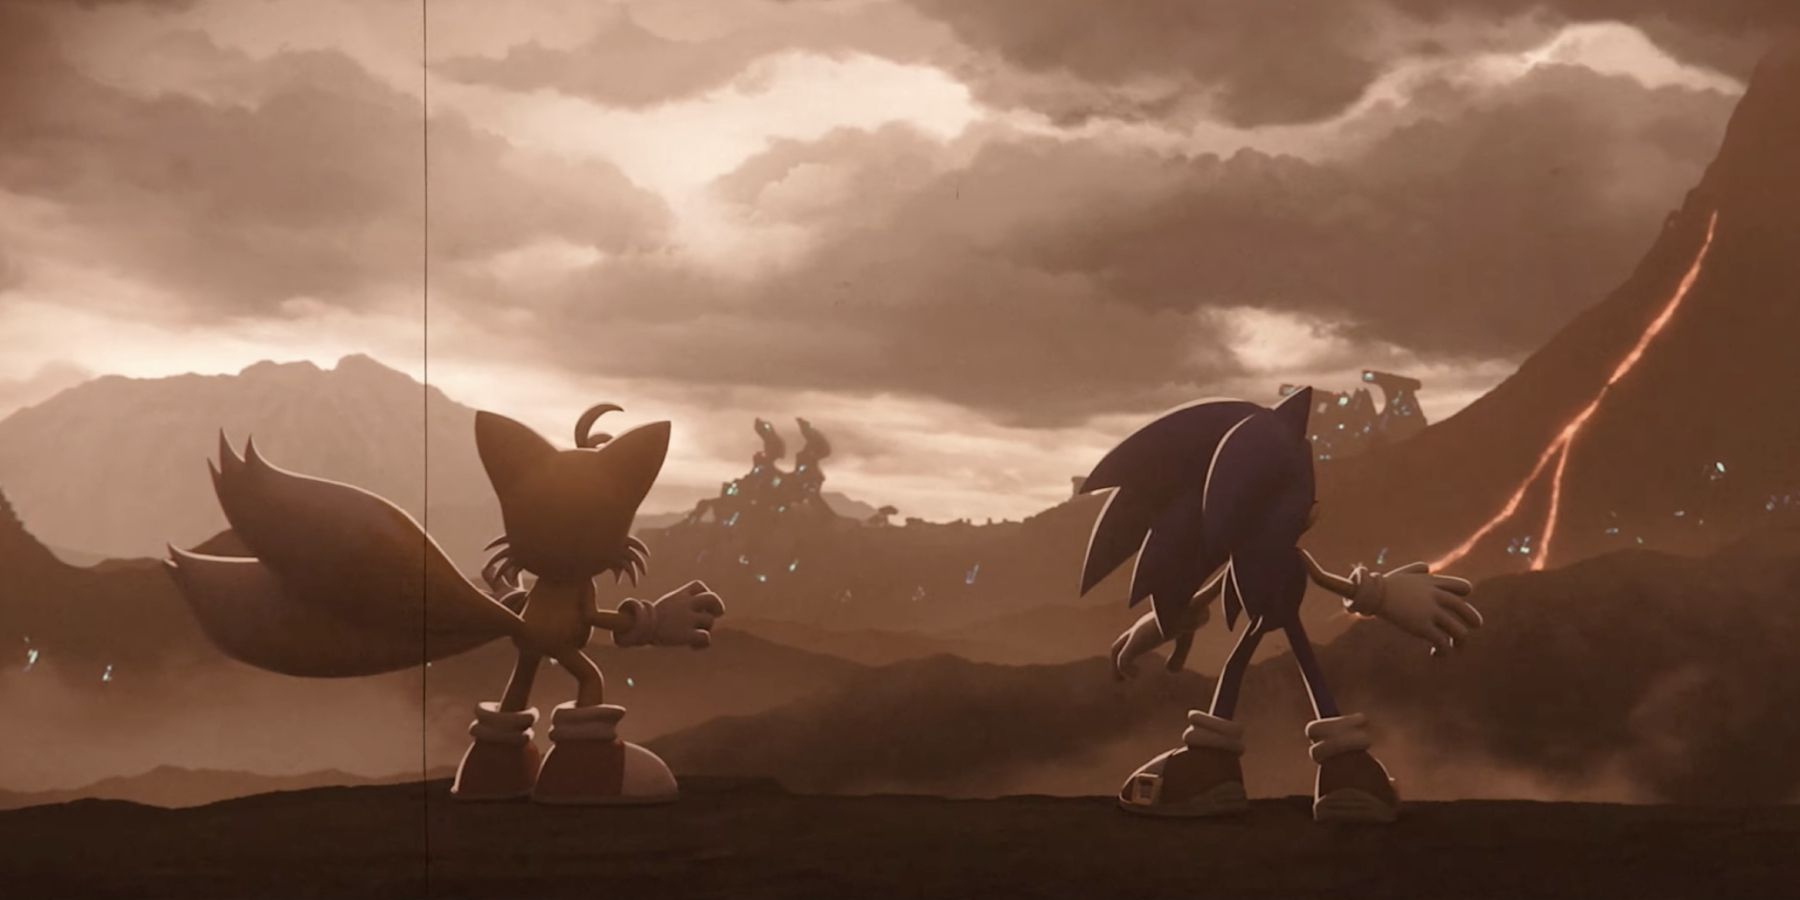 Sonic Frontiers: How to Get the True Ending